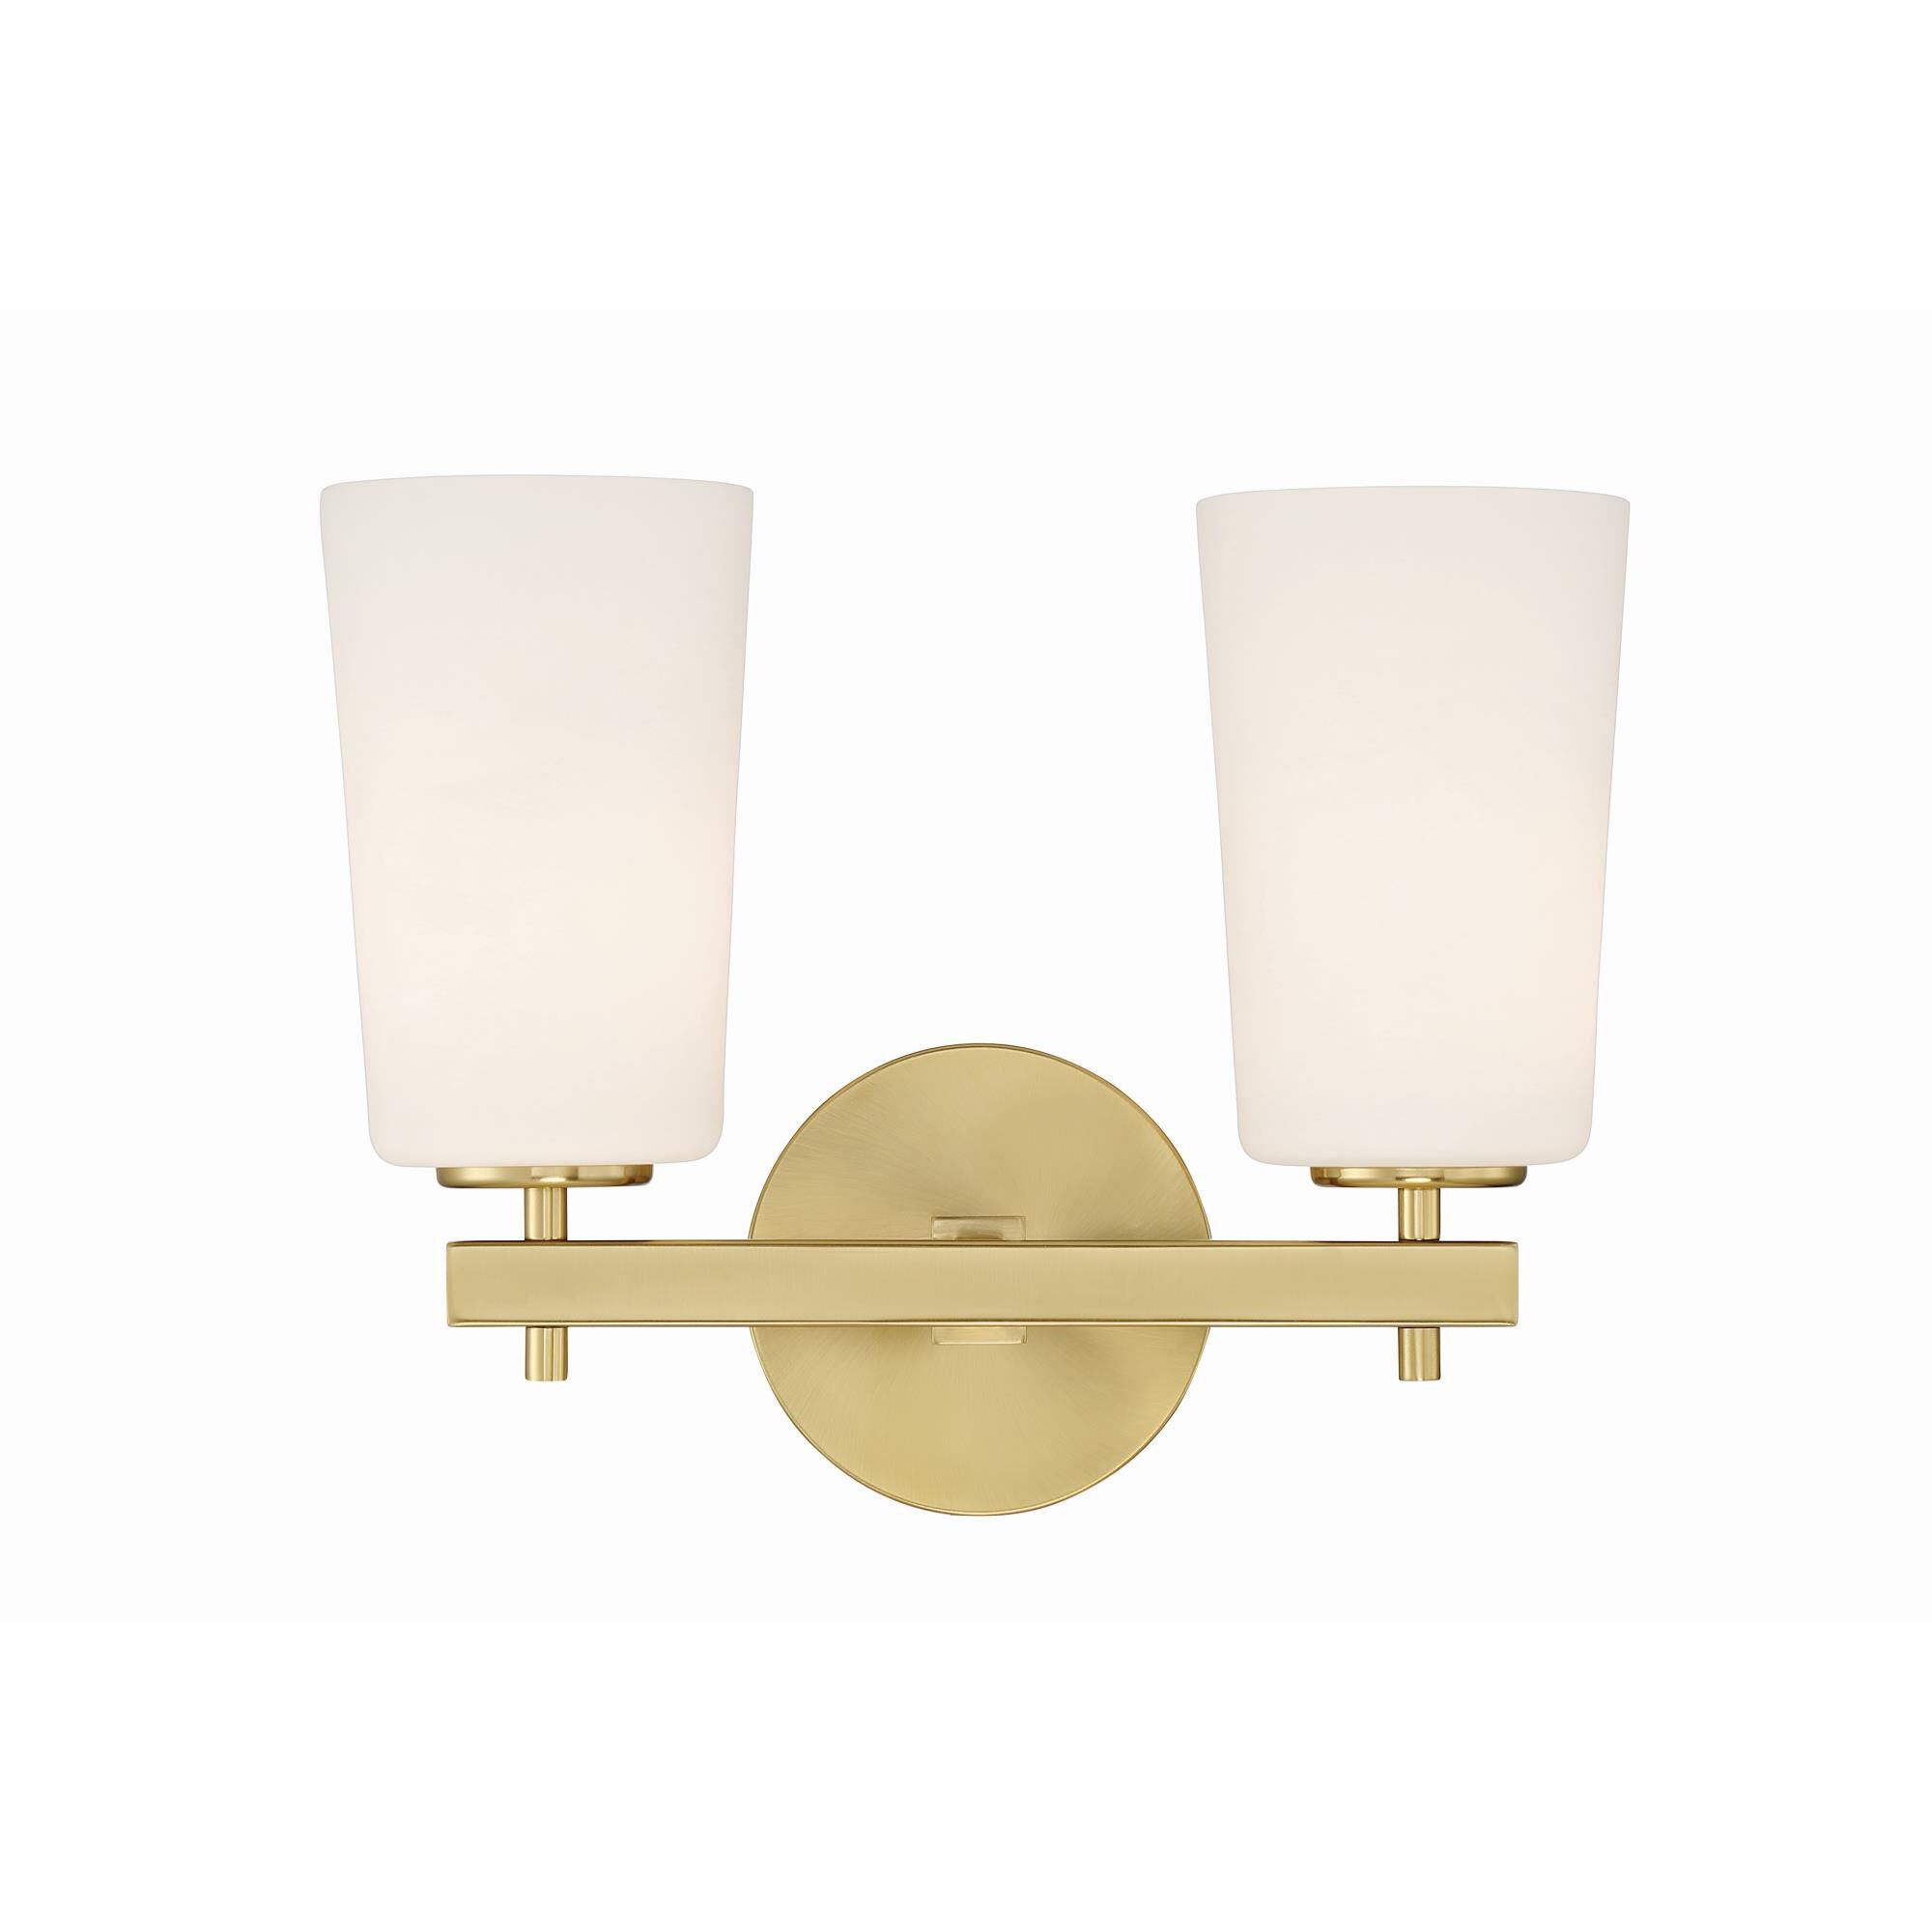 Photos - Chandelier / Lamp Crystorama Colton 14 Inch Wall Sconce Colton - COL-102-AG - Modern Contemp